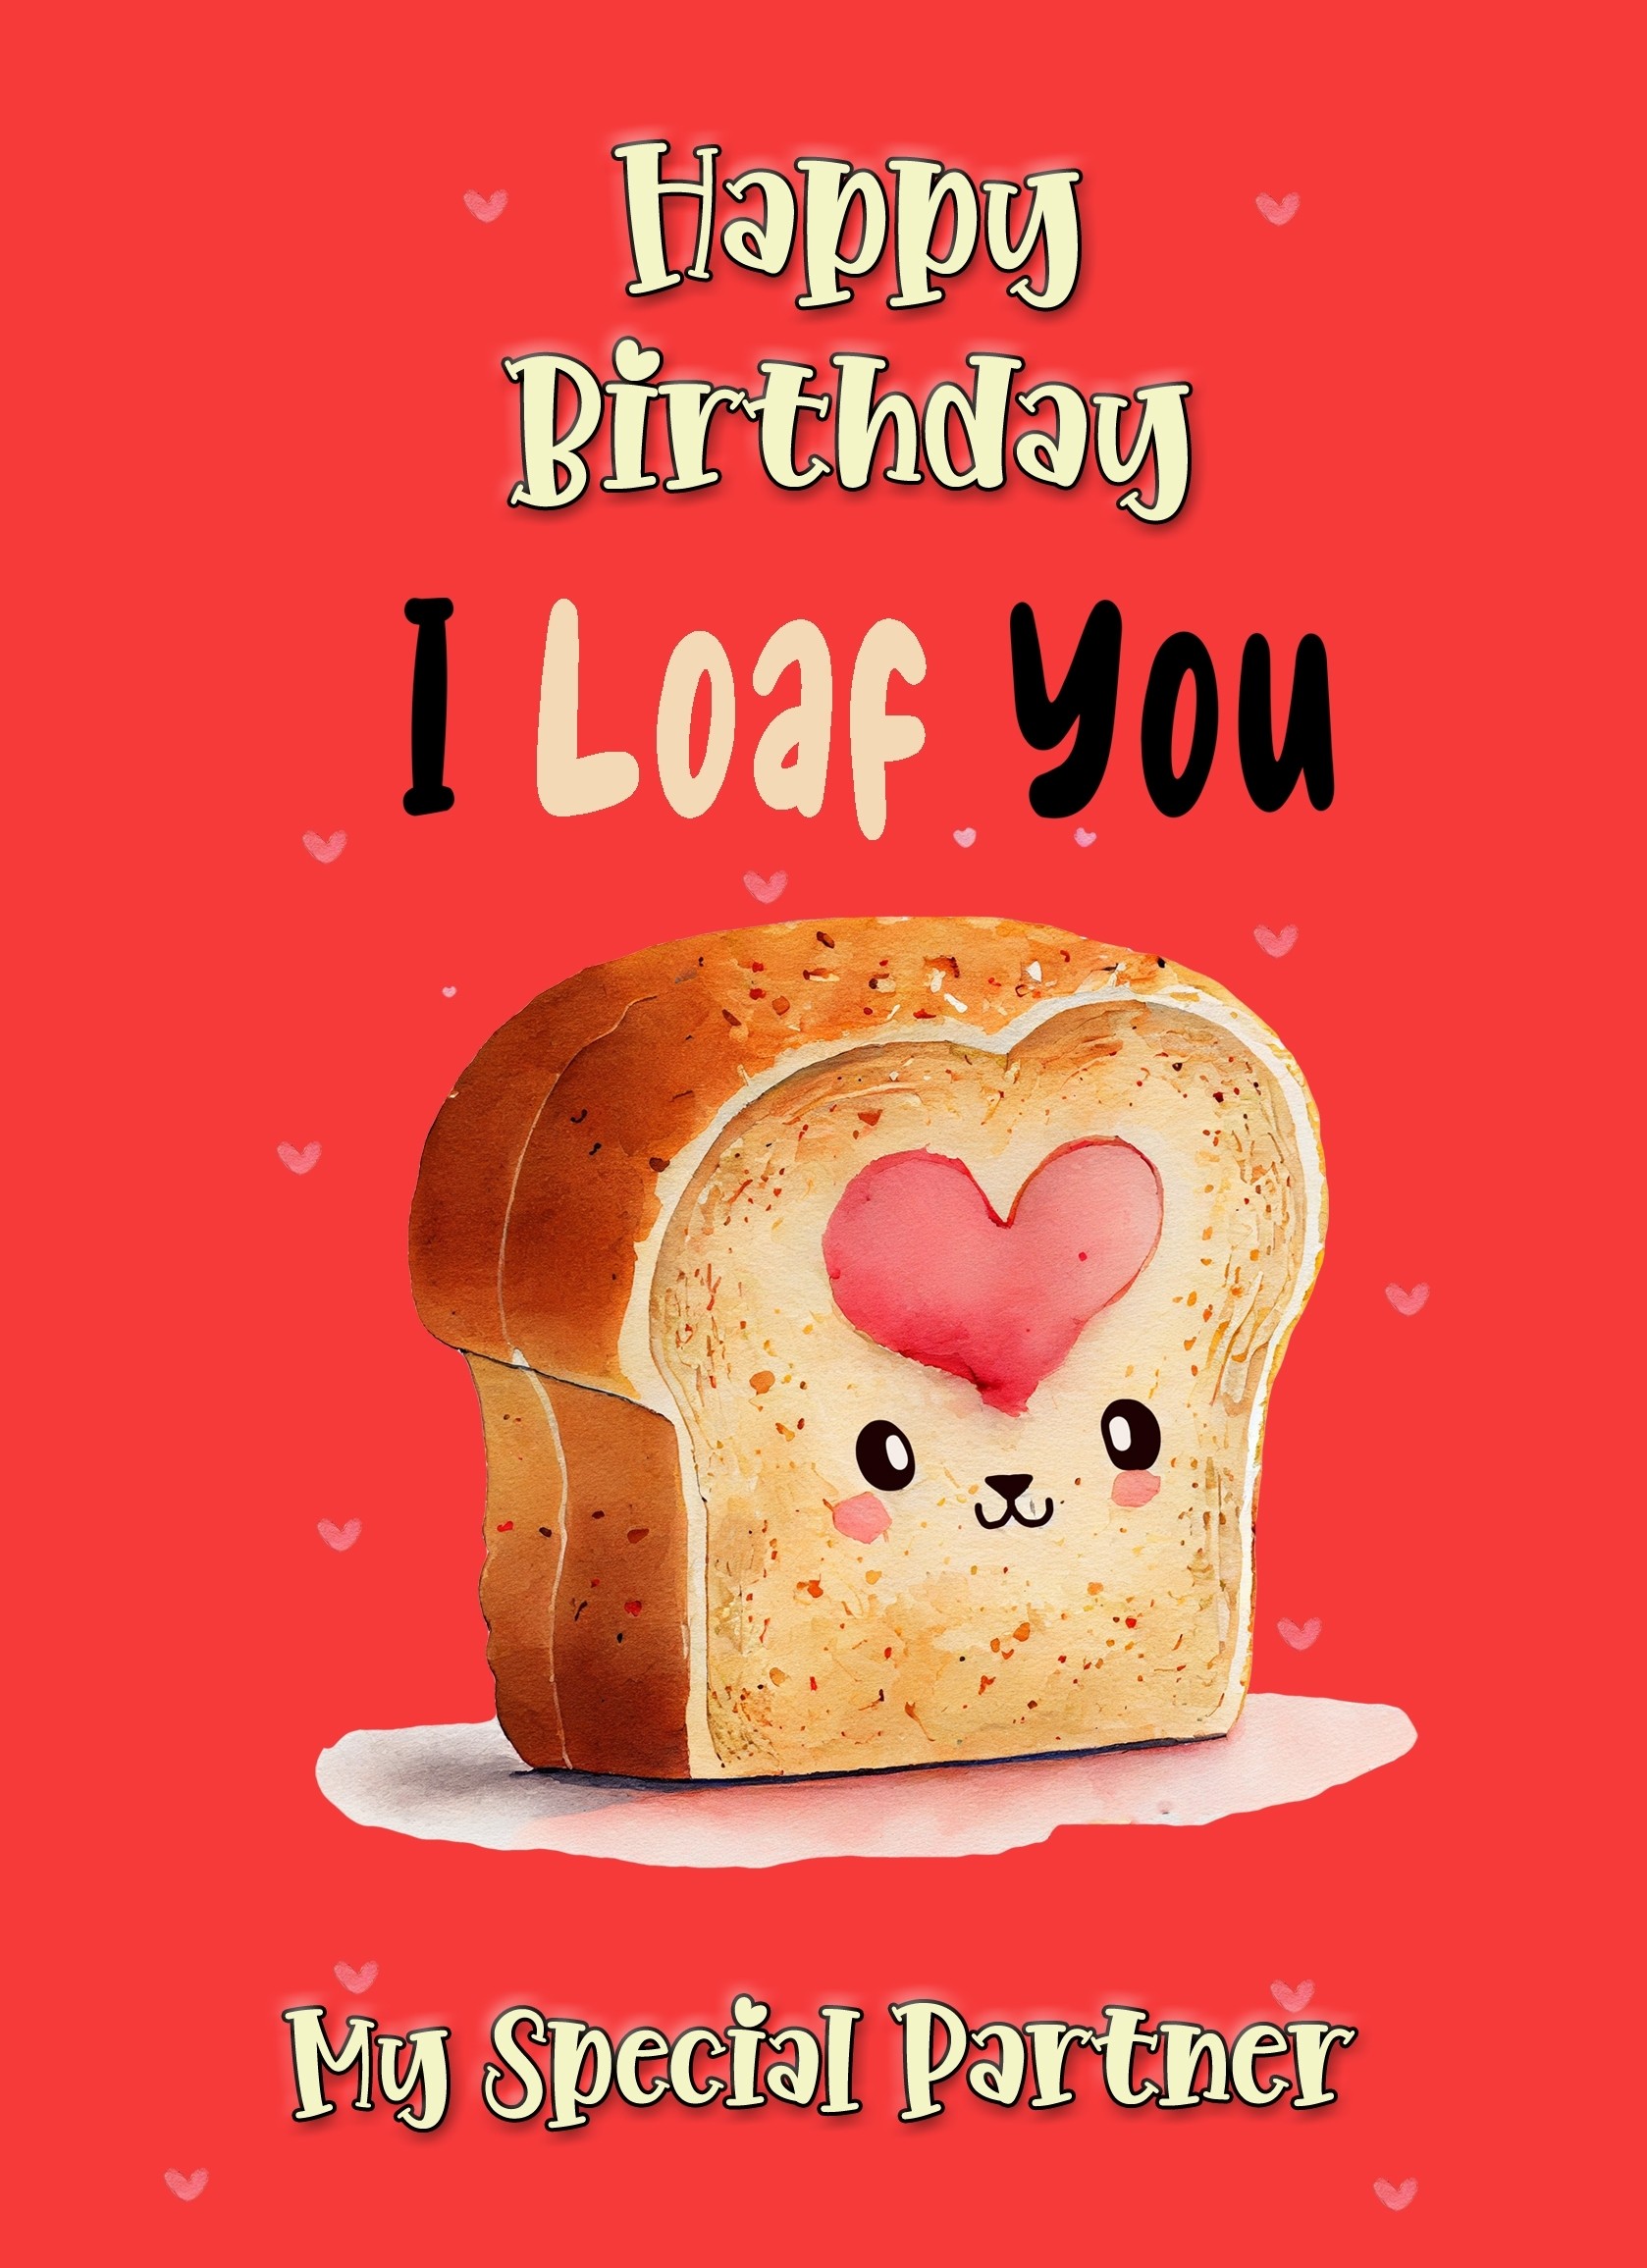 Funny Pun Romantic Birthday Card for Partner (Loaf You)